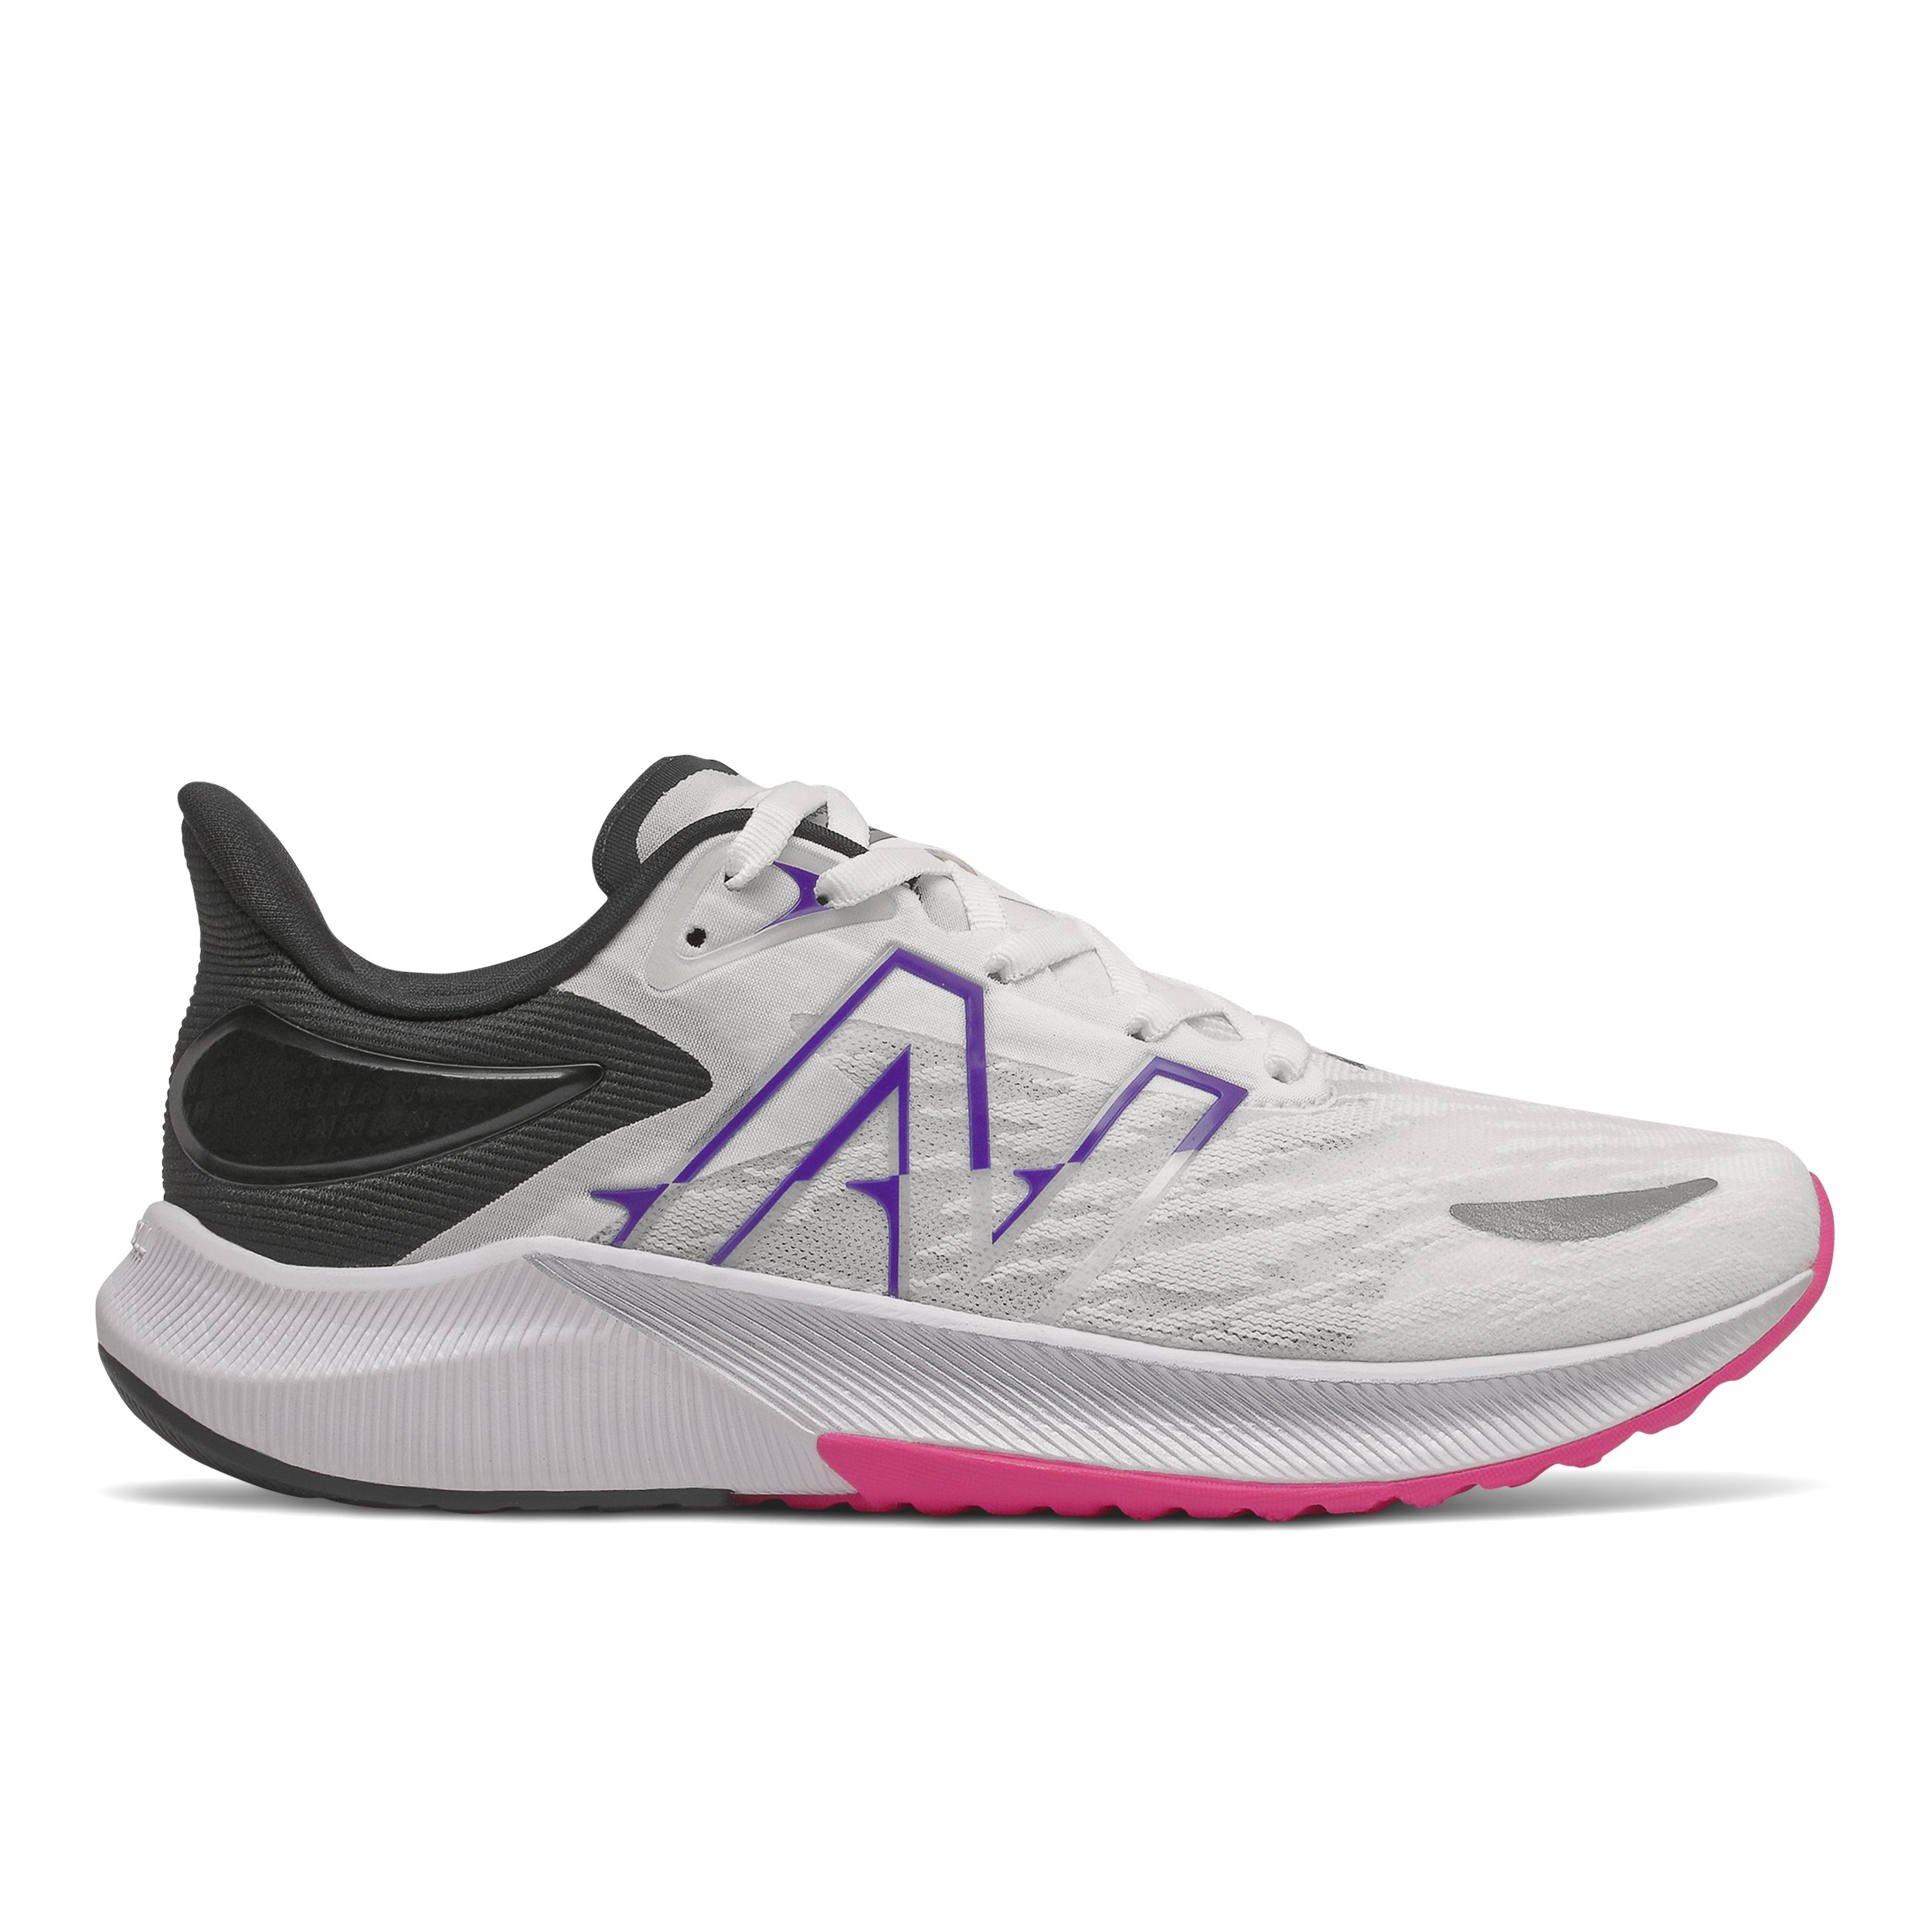 New Balance FuelCell Propel v3 WFCPRLM3 Women's2